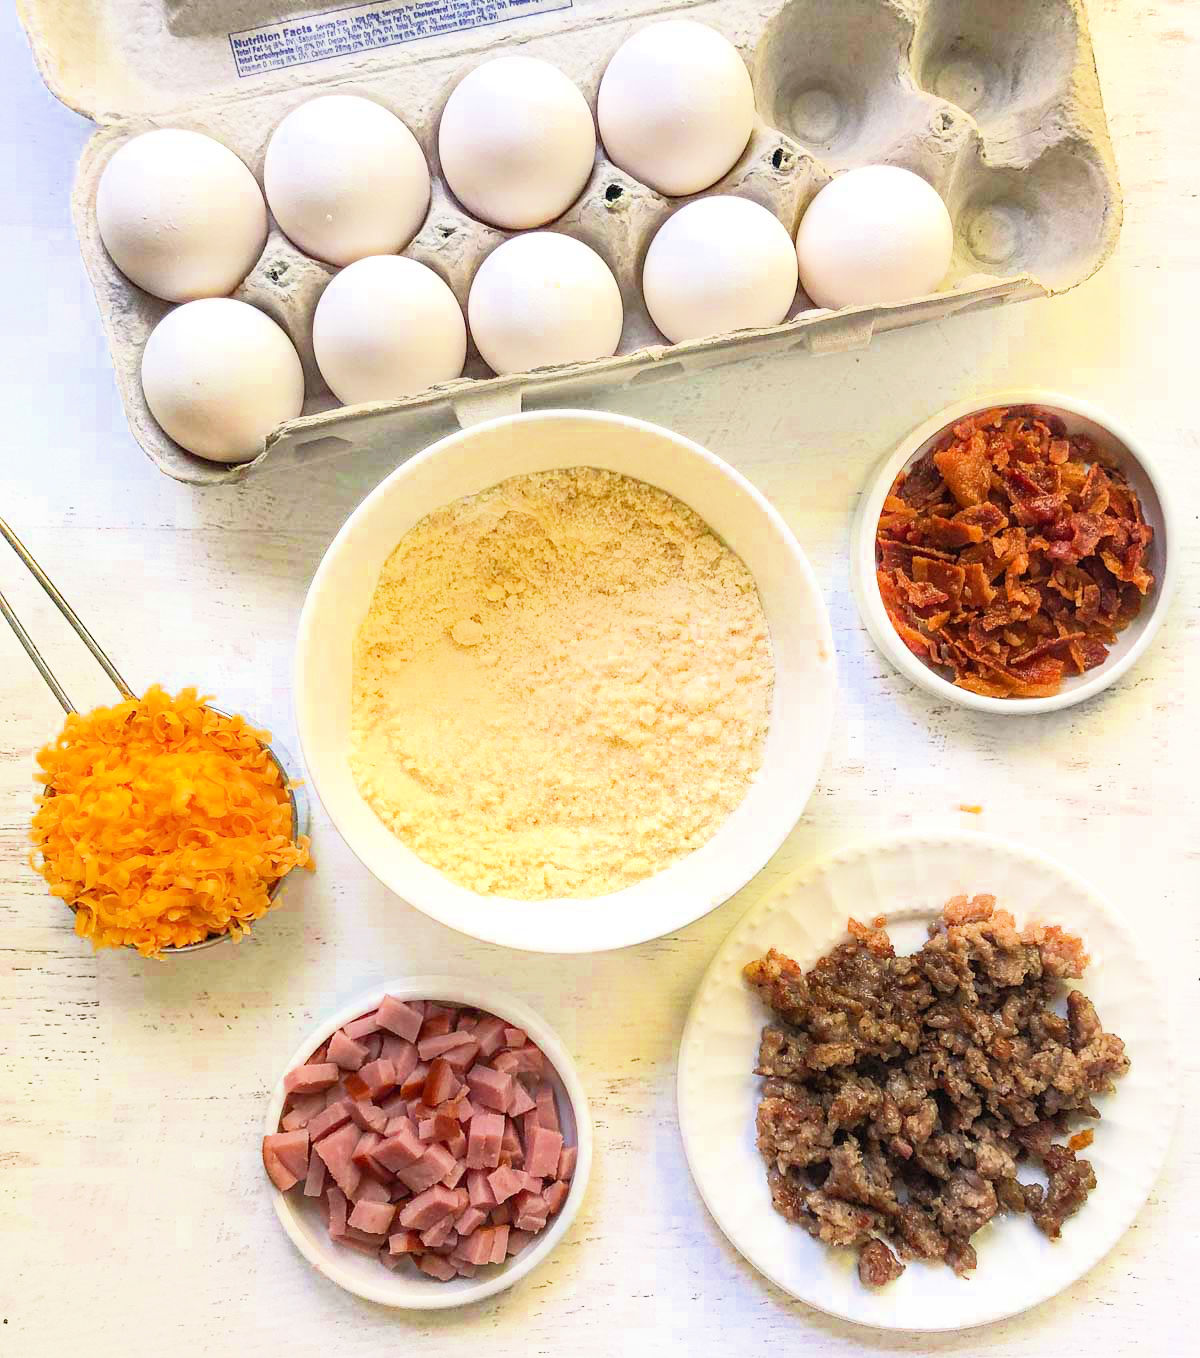 recipe ingredients - eggs, cheese, almond flour, bacon, ham and sausage